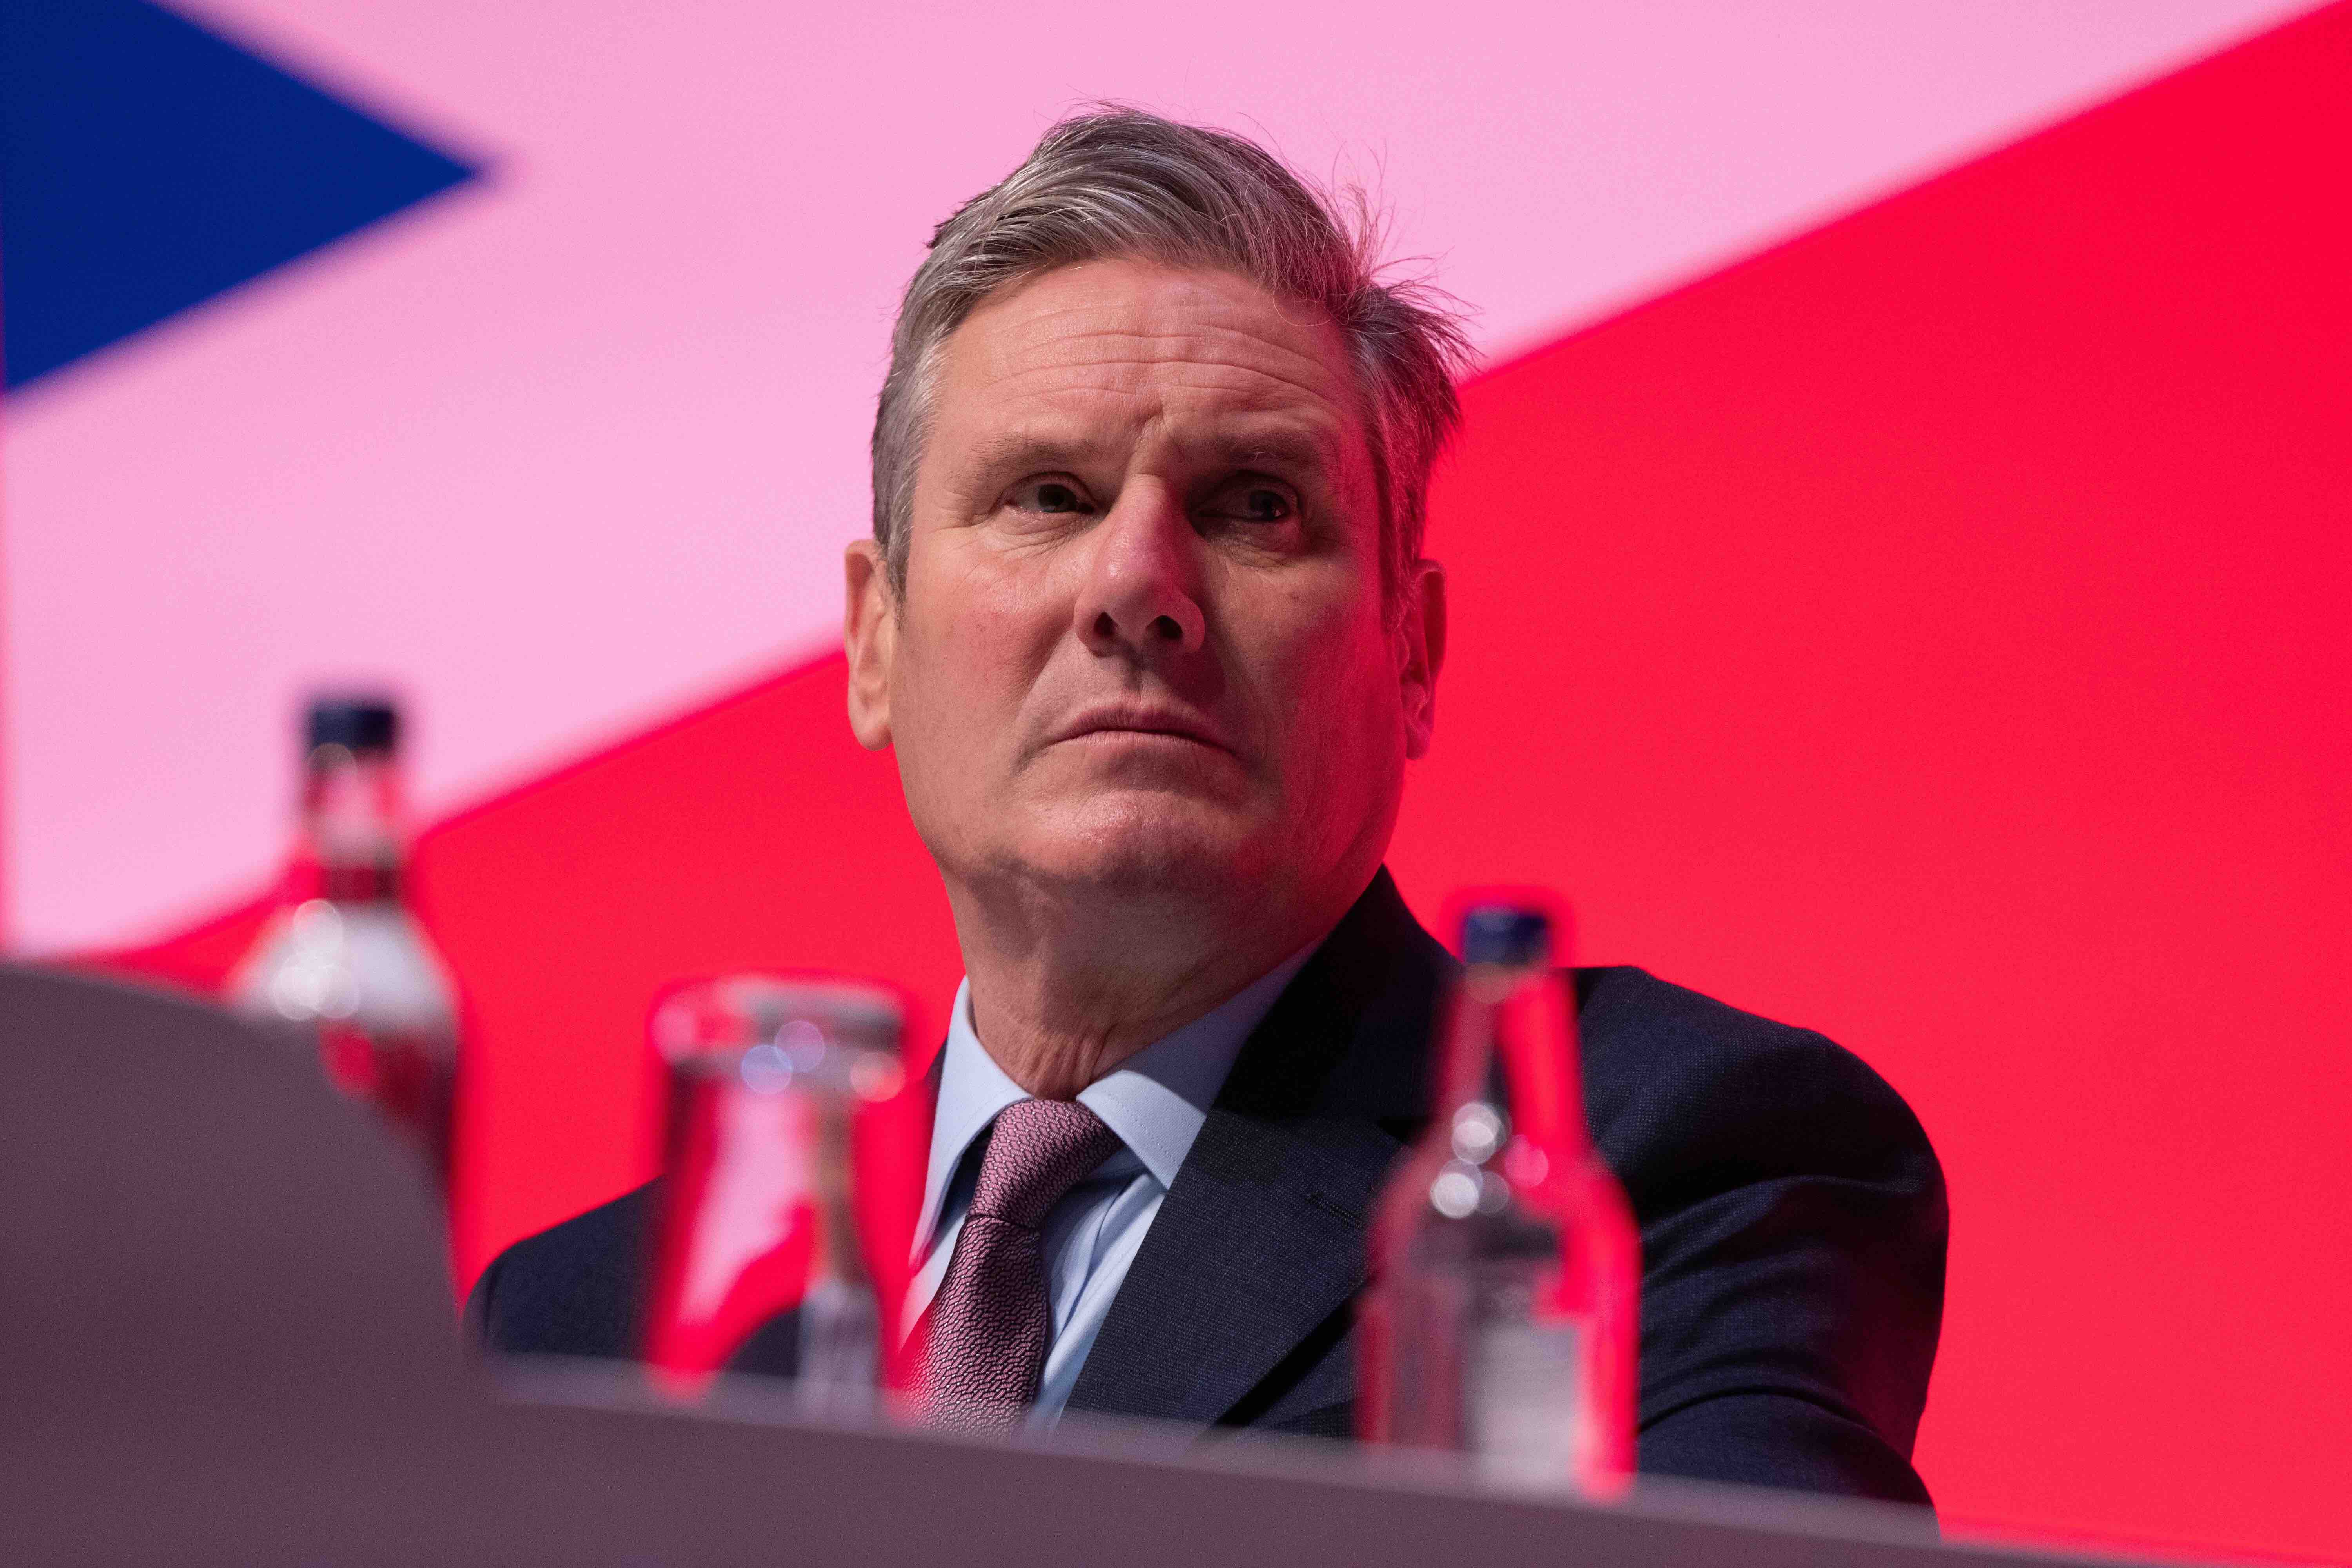 Analysis reveals high probability of Starmer’s audio on Rochdale to be a deepfake